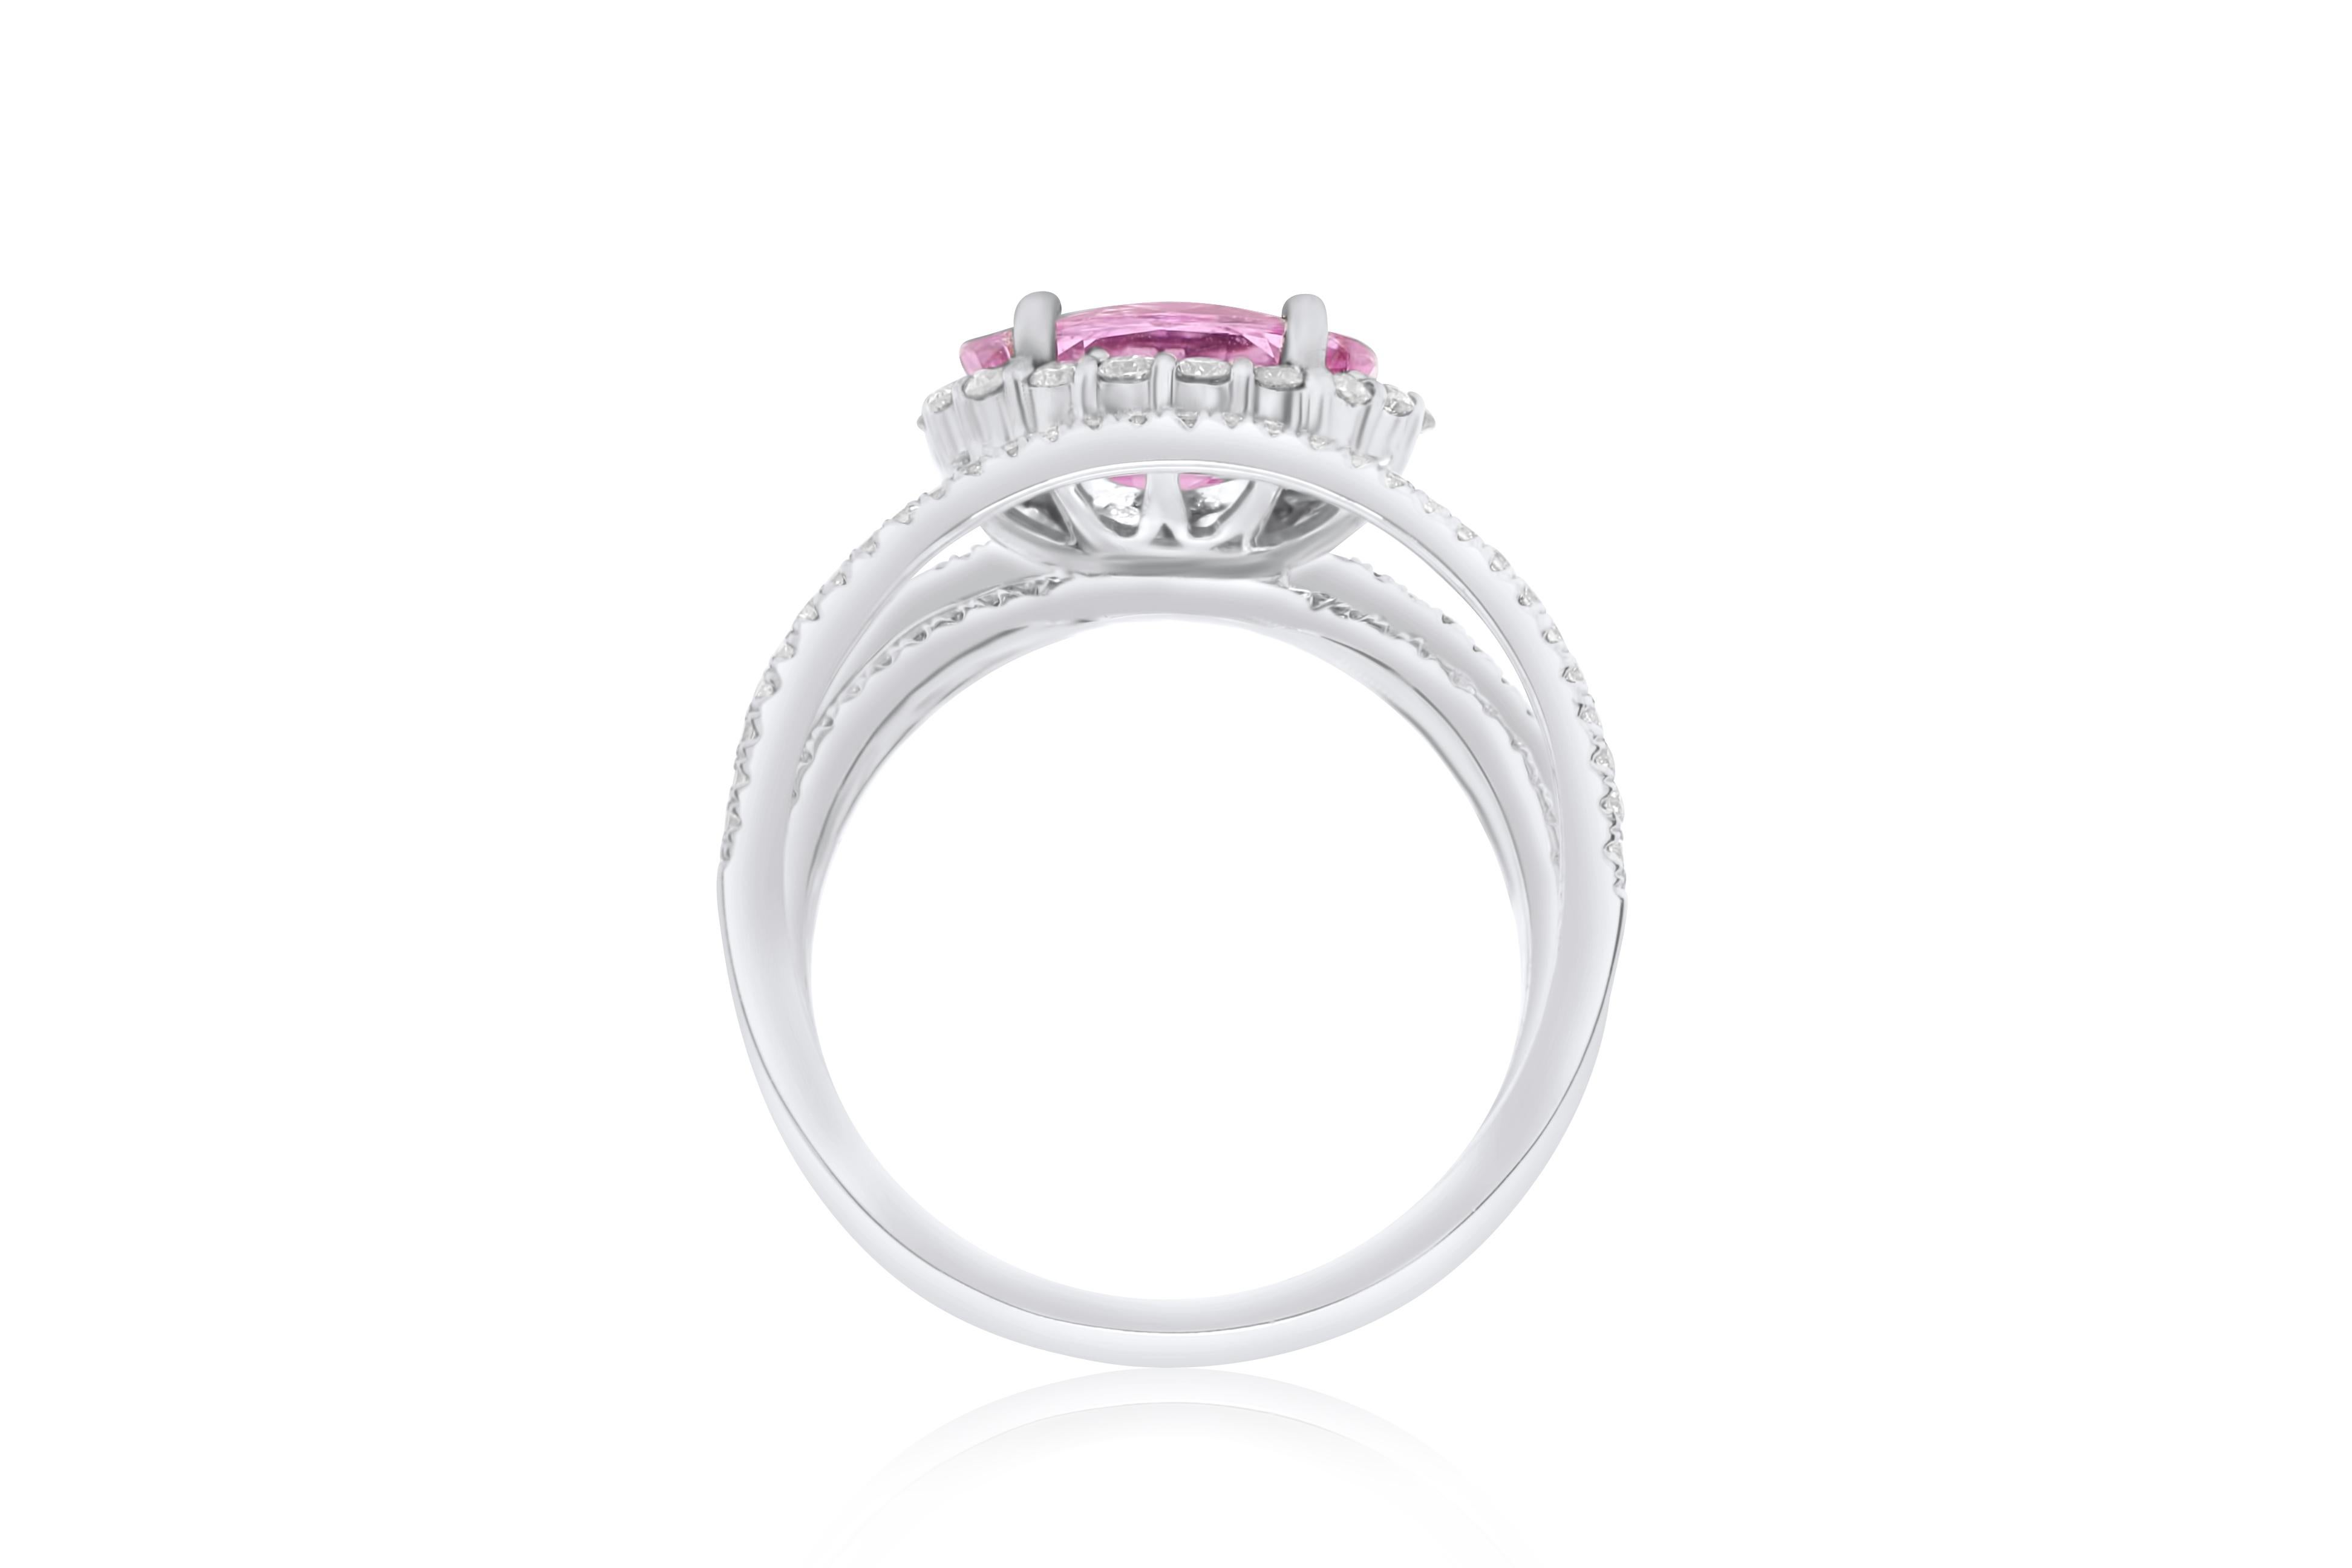 Cushion Cut Diana M. 18 kt white gold  pink sapphire diamond ring featuring a 2.86 ct For Sale